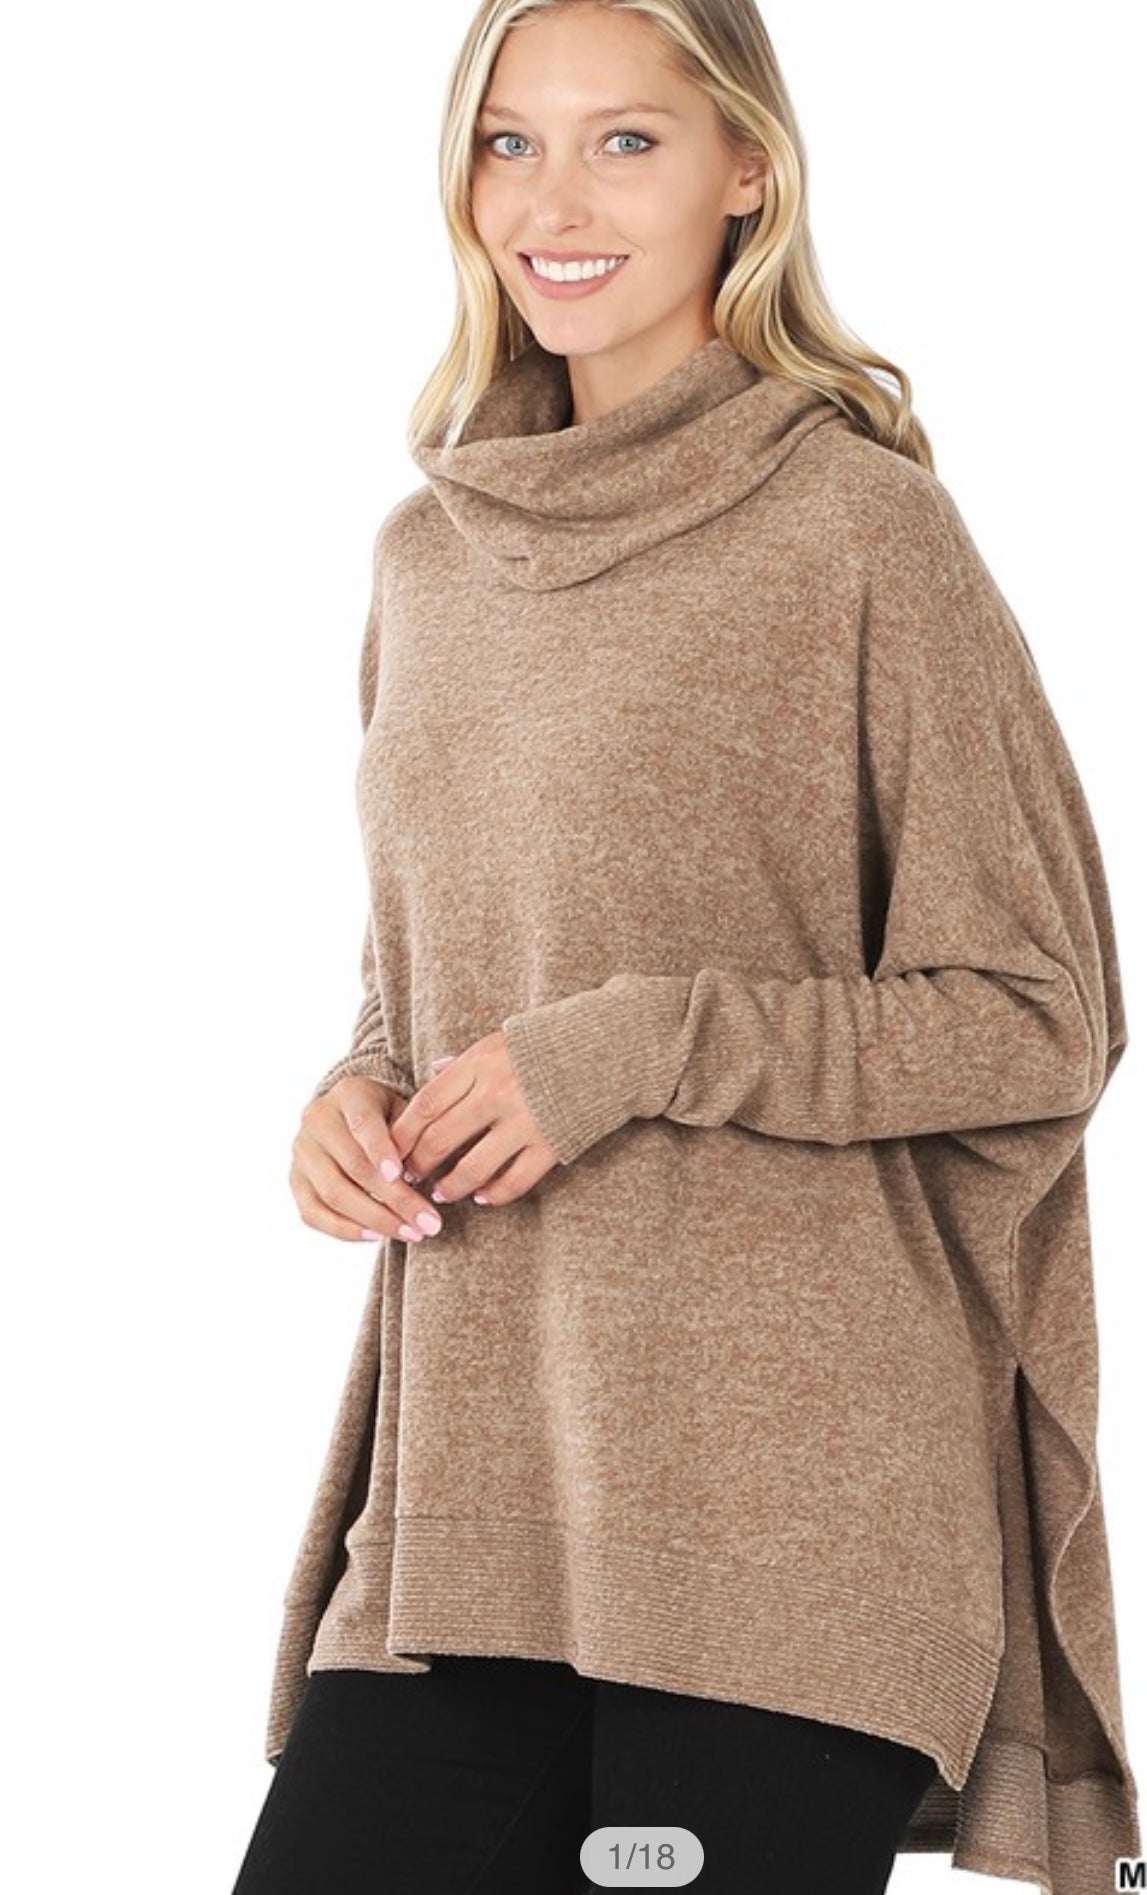 The Sweater You Need In Mocha